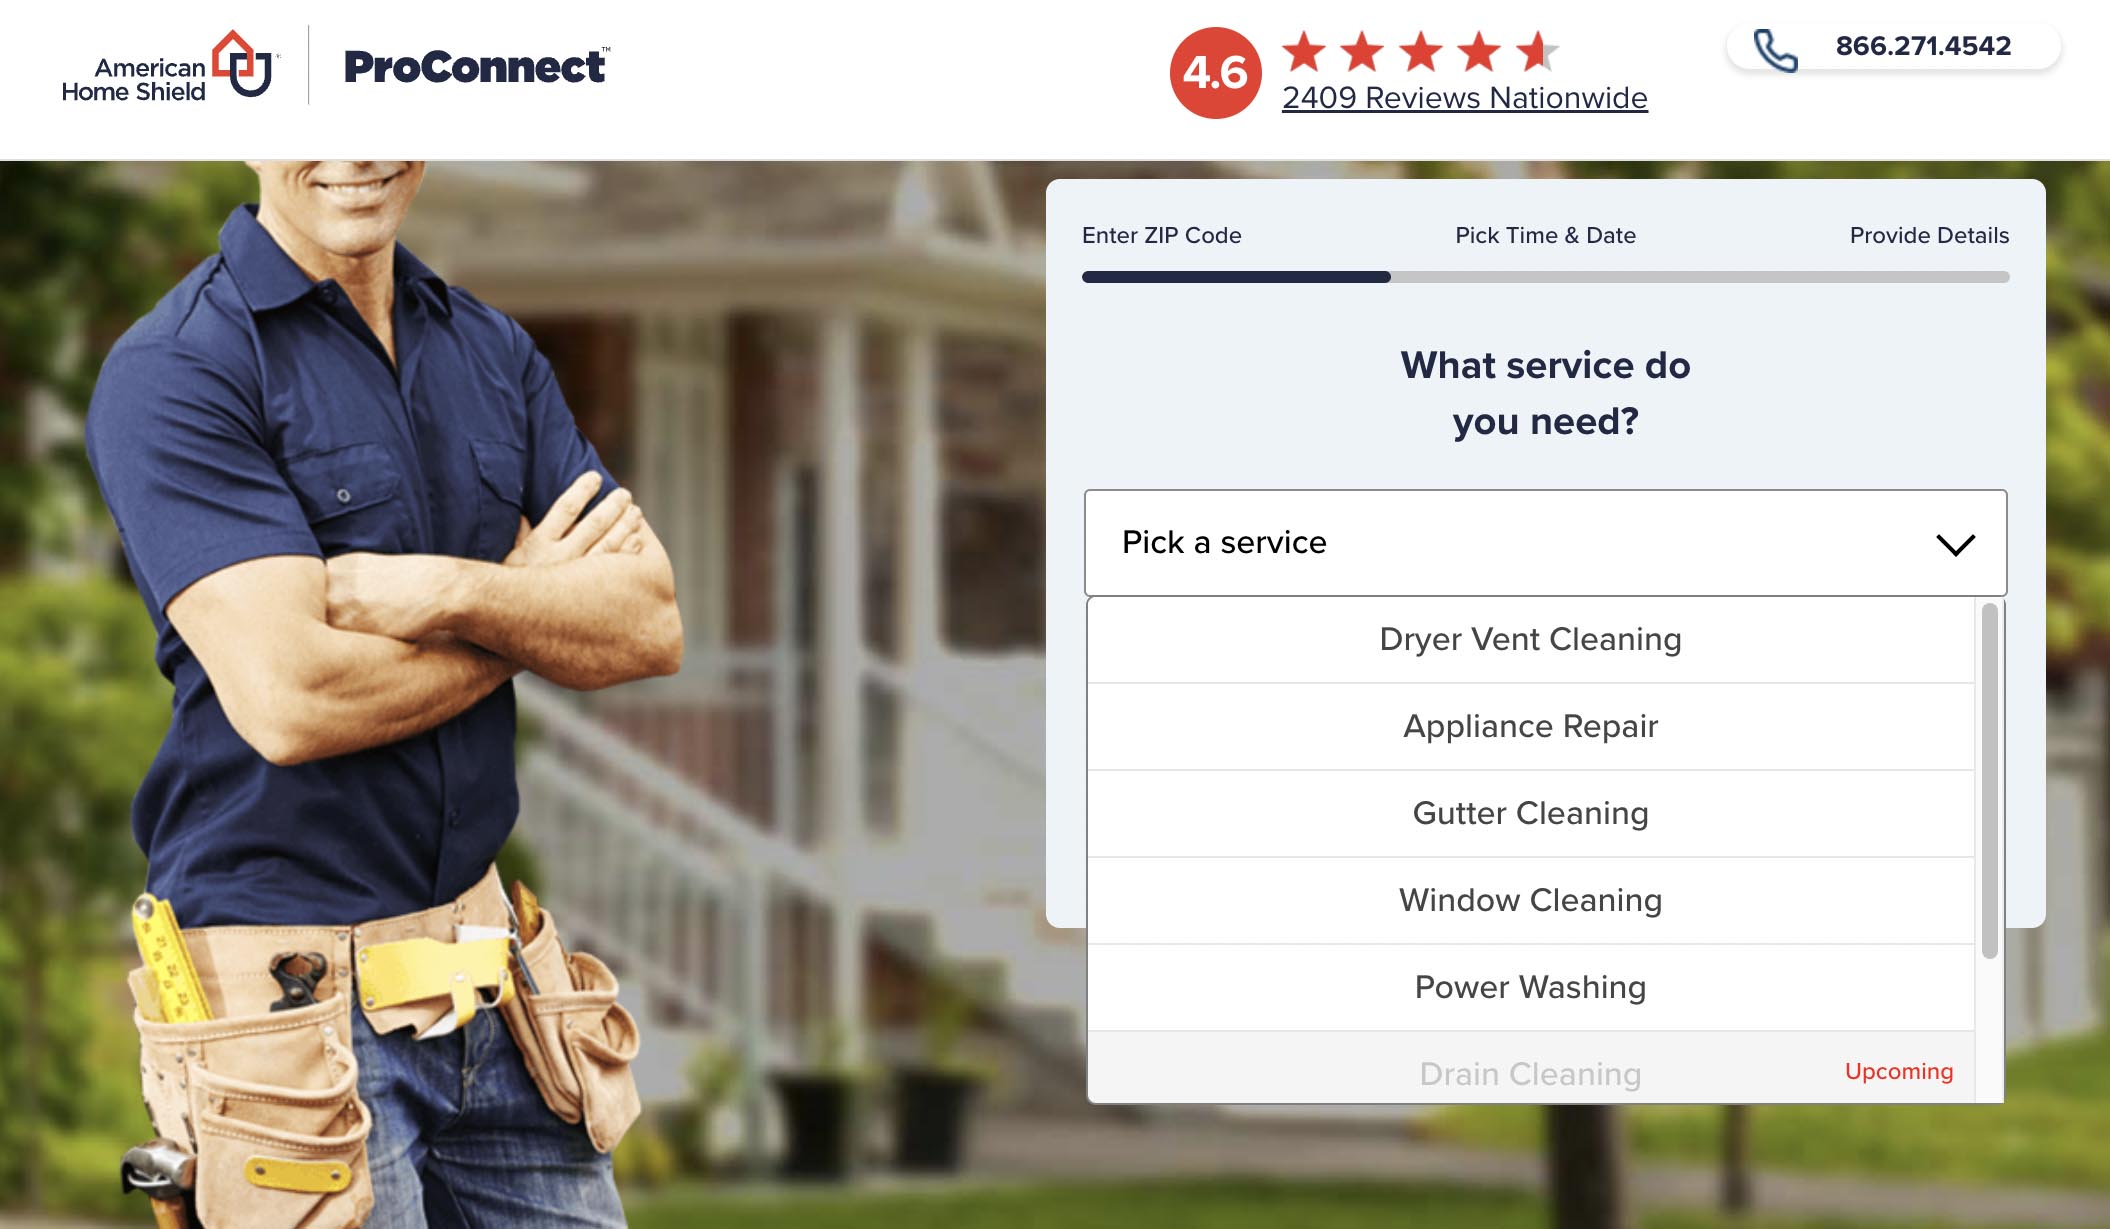 American Home Shield Review ProConnect service page